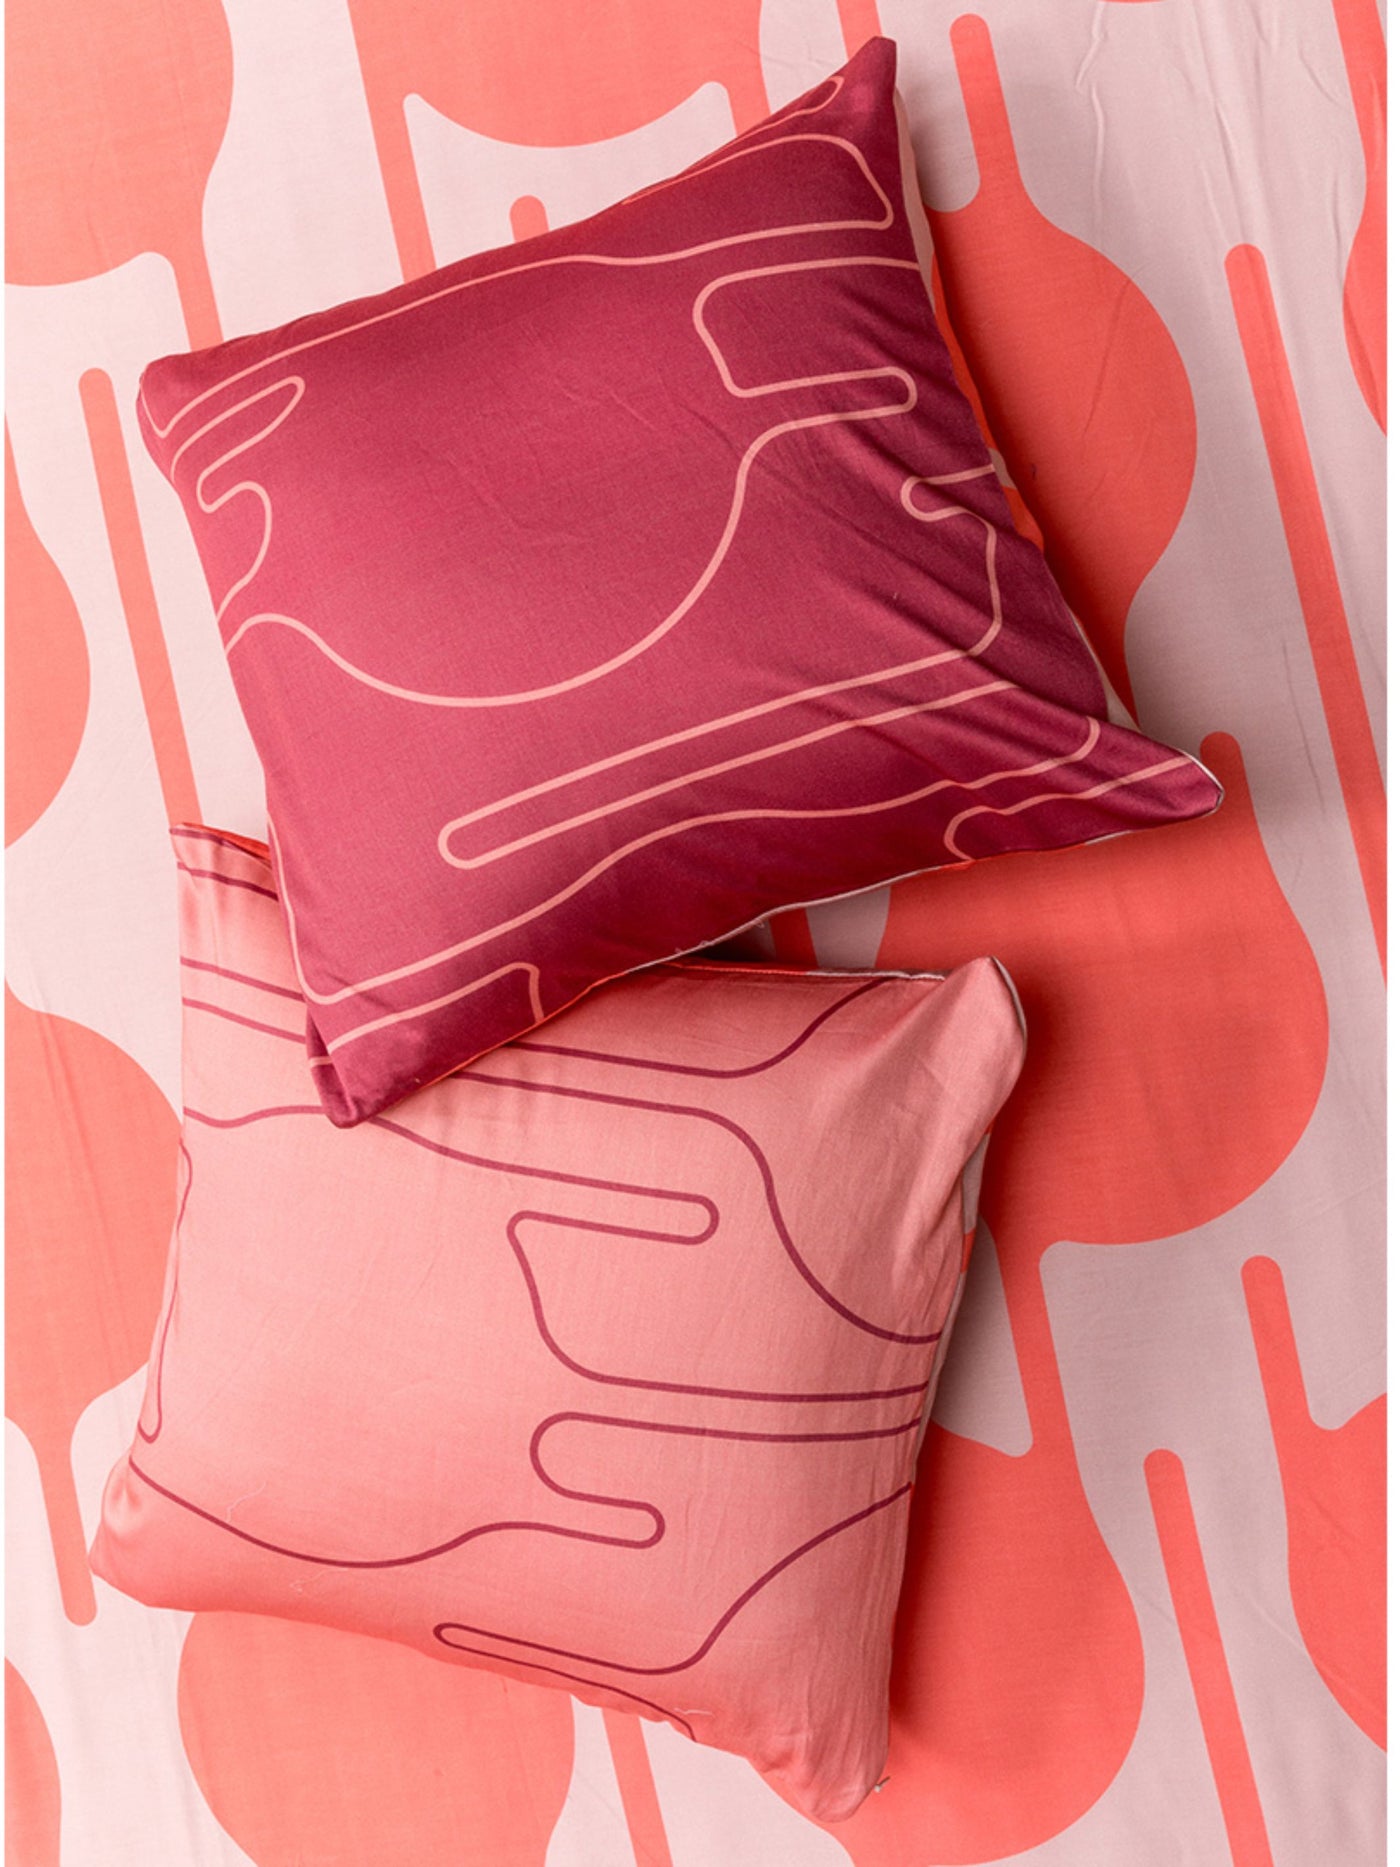 Cushion Cover - The Dripdrip In Coral